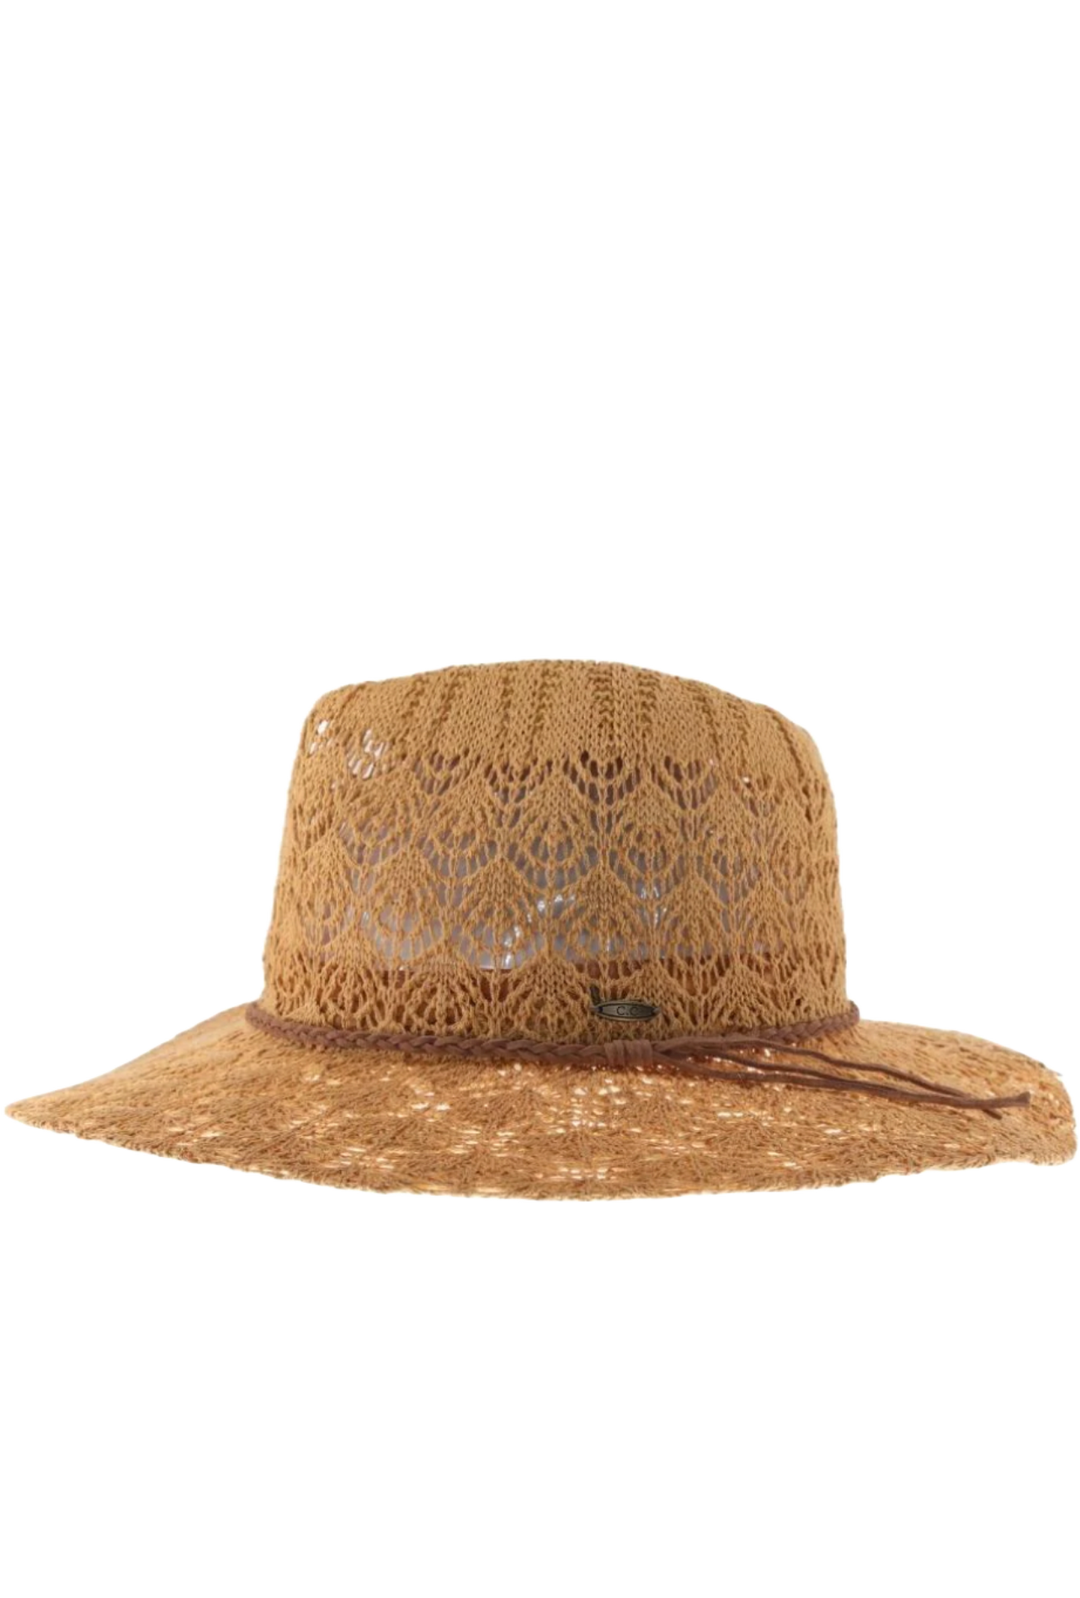 Horseshoe Lace Knit with Braided Suede Trim Panama Hat- Desert mist